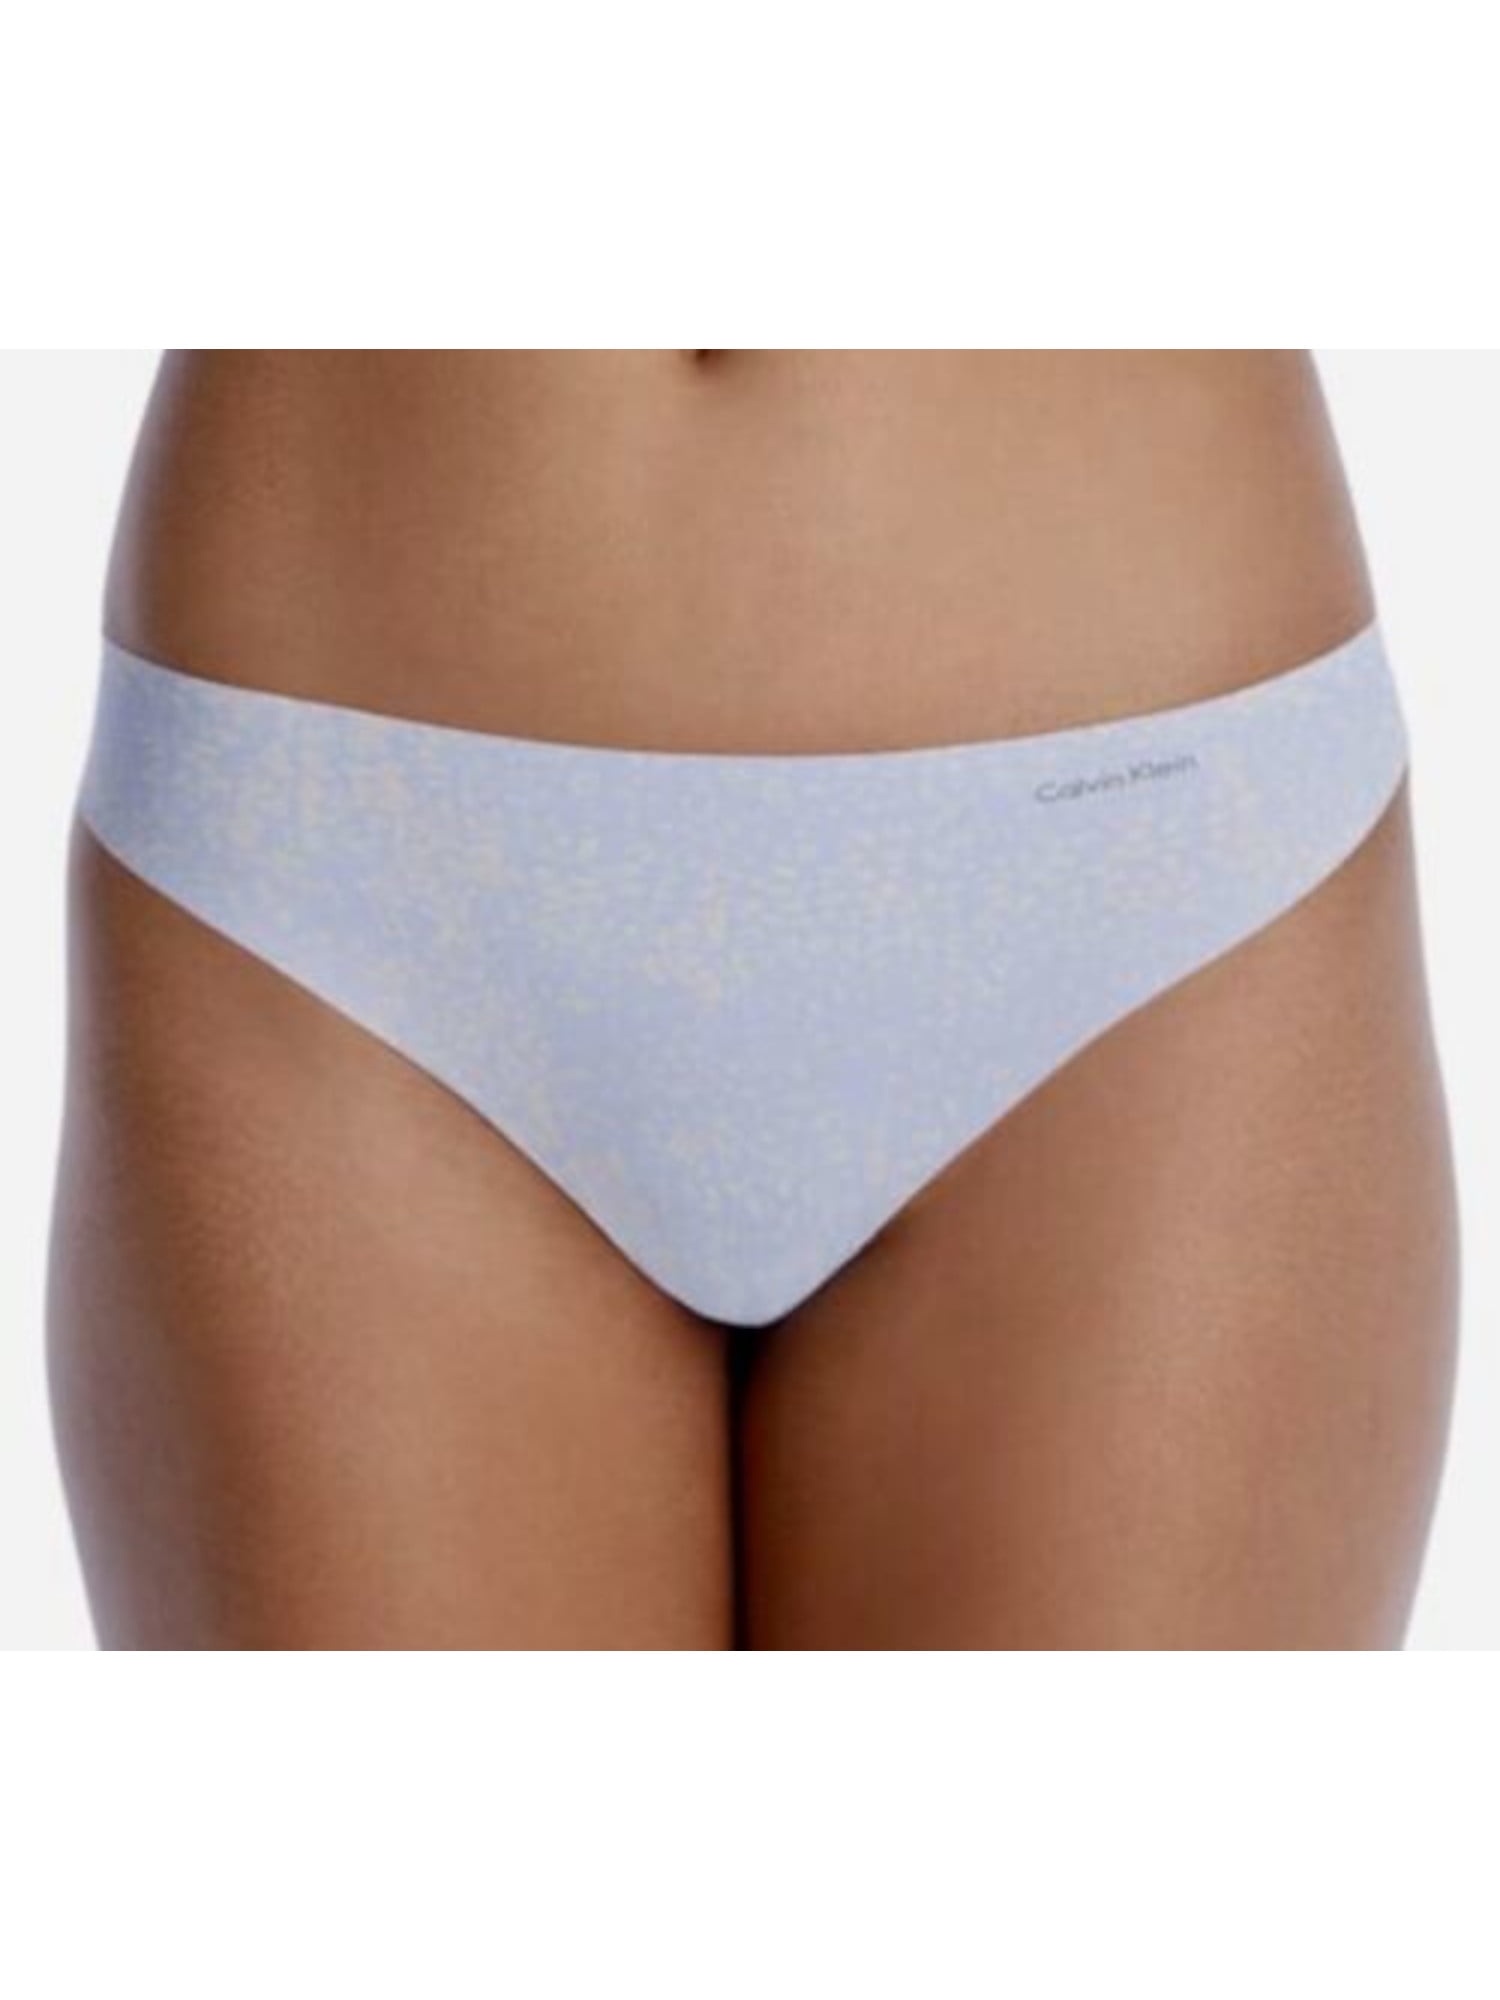 Women's Calvin Klein Invisibles Thong Panty D3507